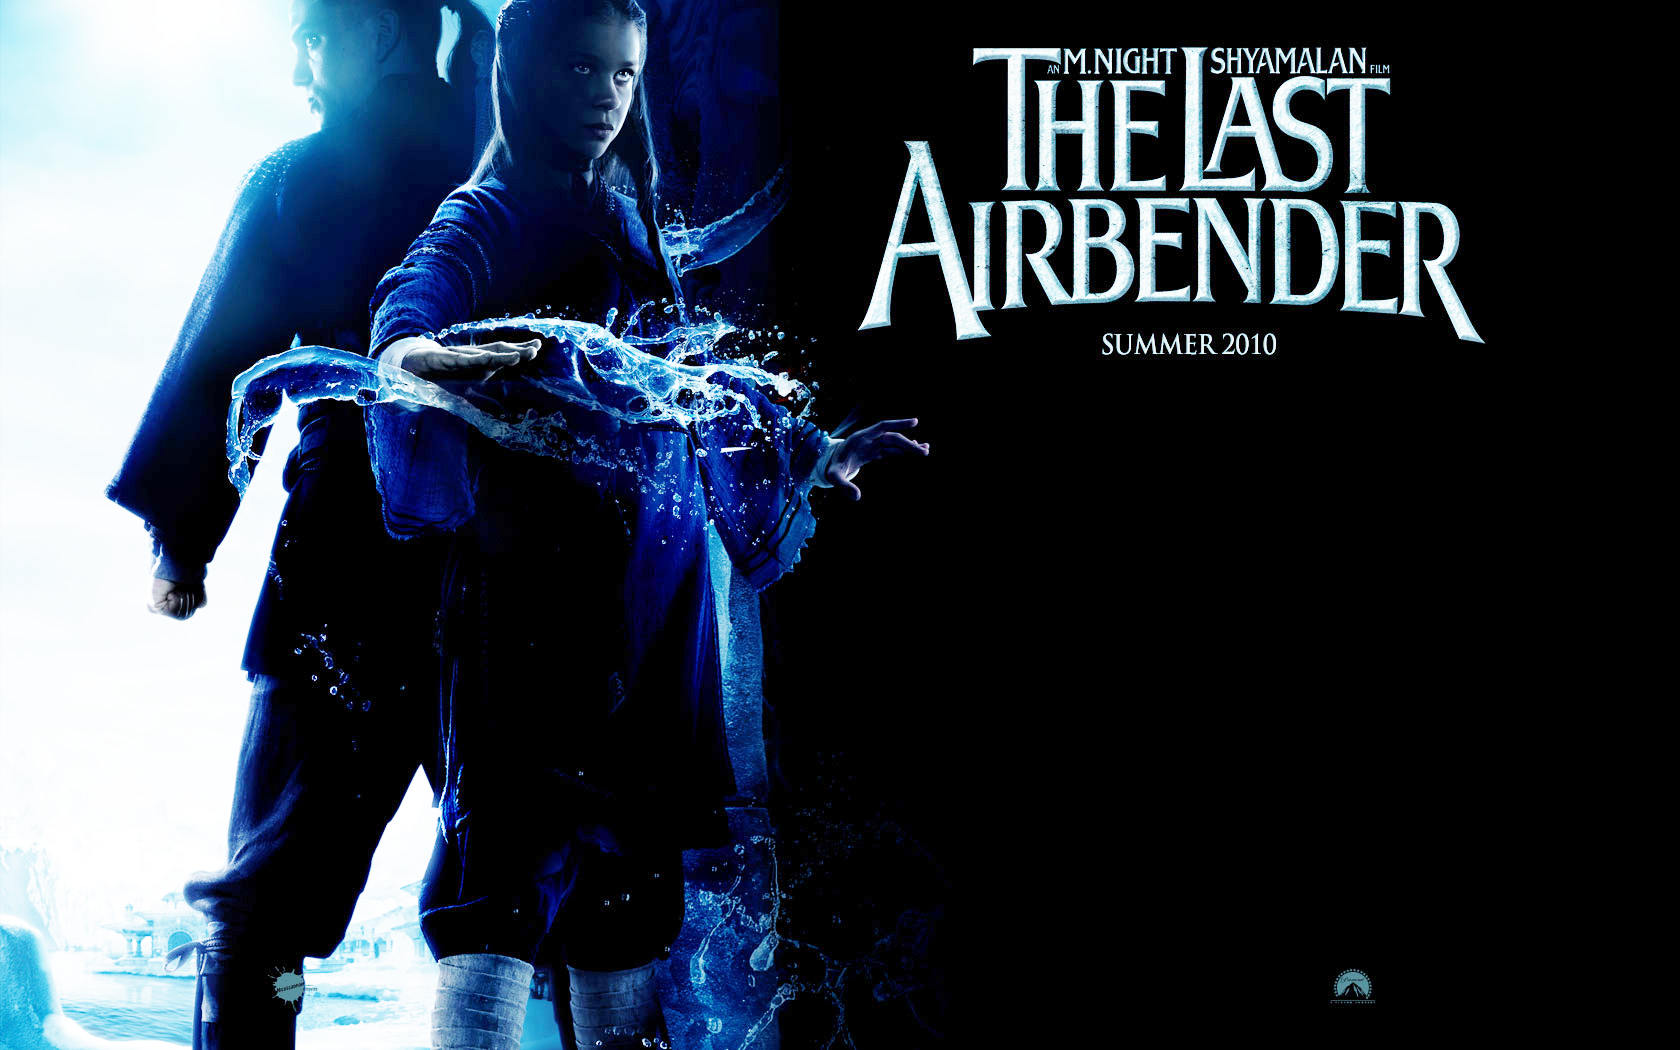 Poster of Paramount Pictures' The Last Airbender (2010)